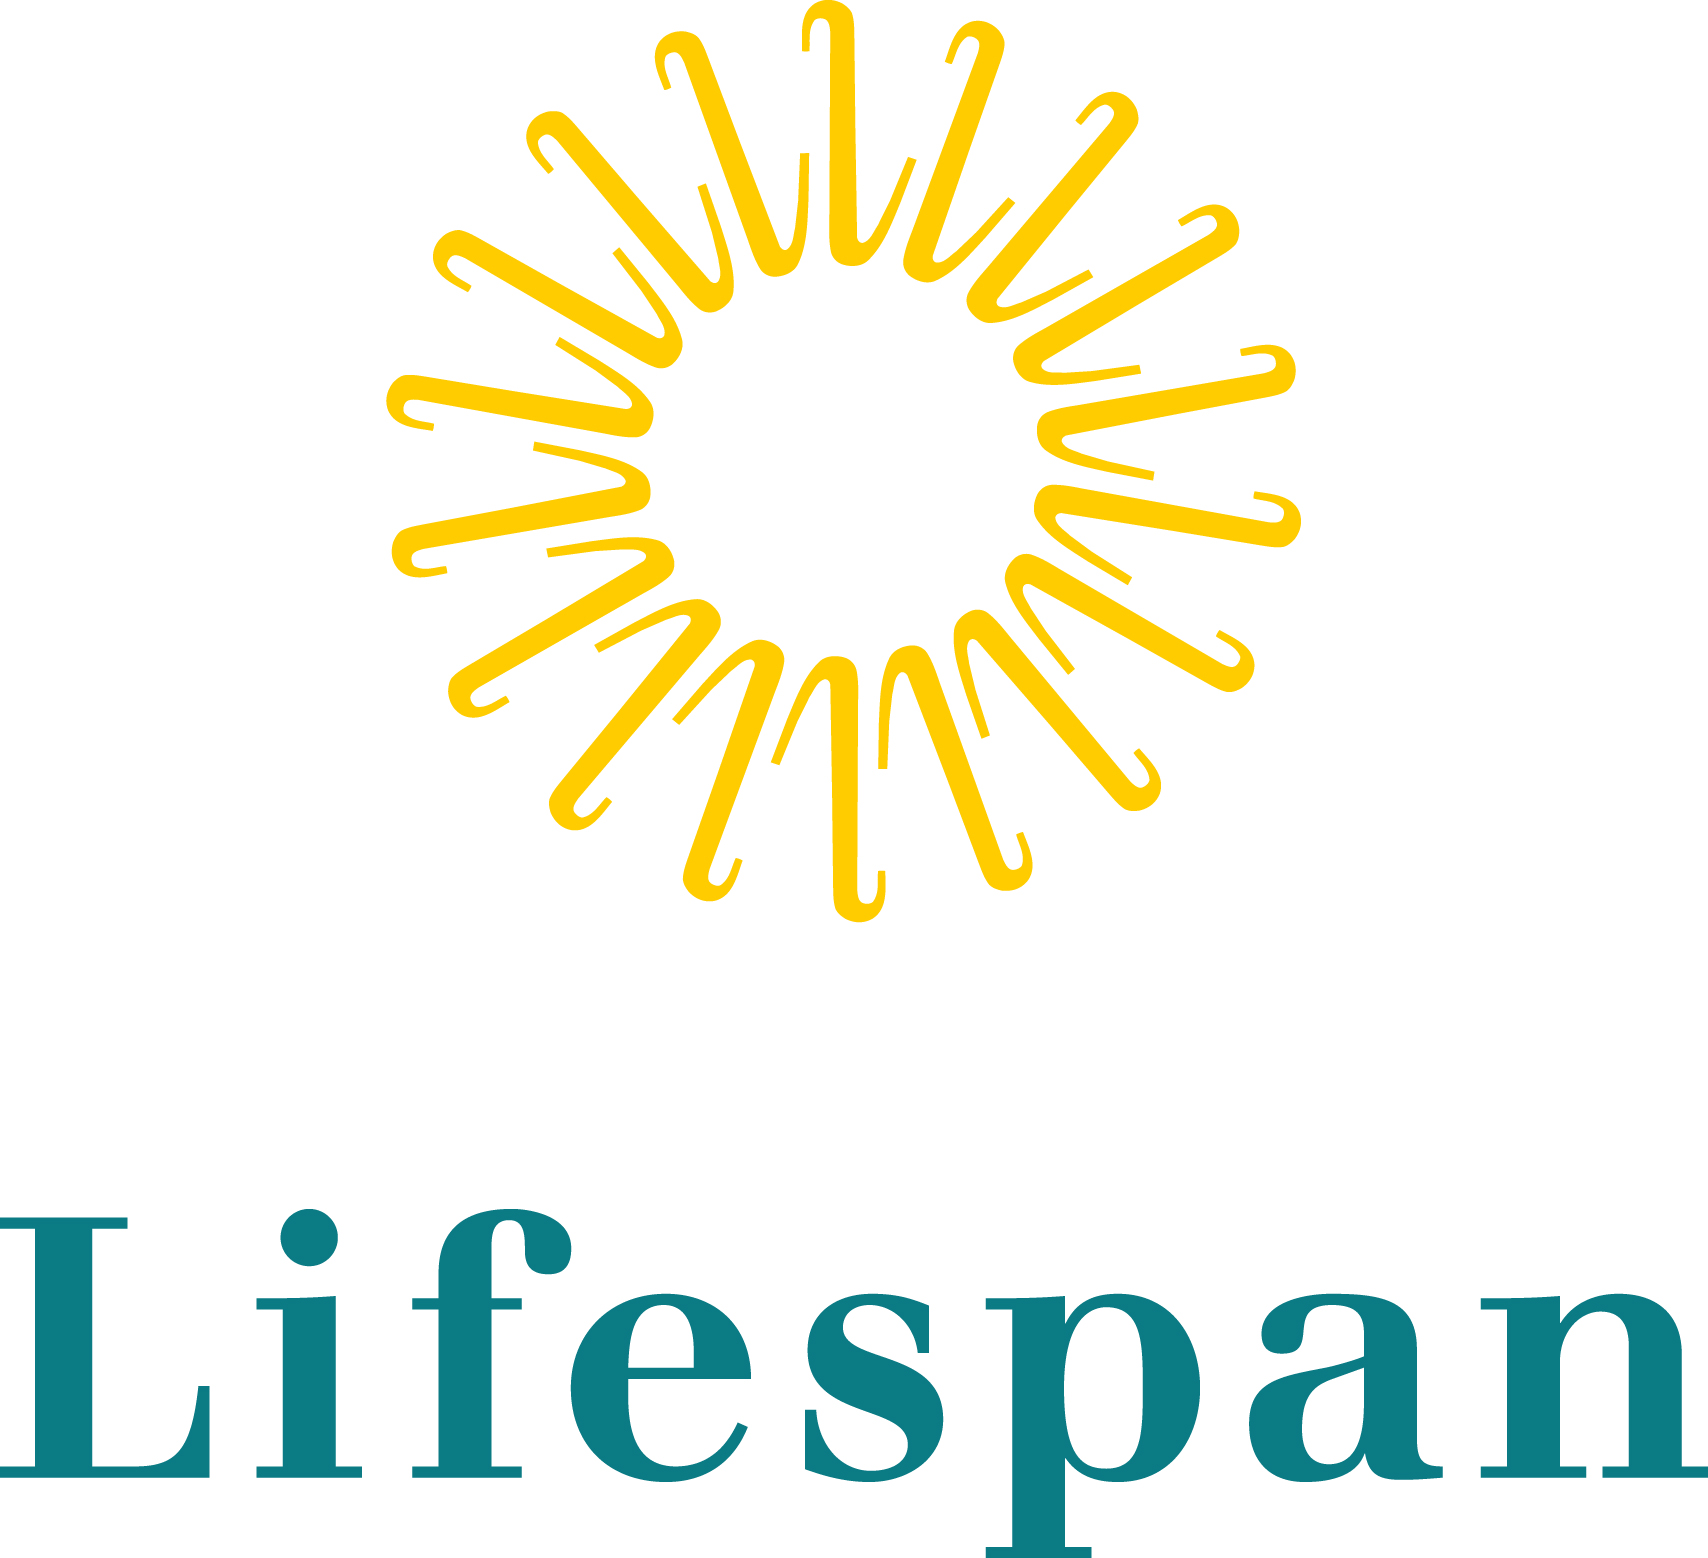 LIFESPAN NET ASSETS increased $126.9 million year over year to $1.4 billion for the year ended Sept. 30, 2017.